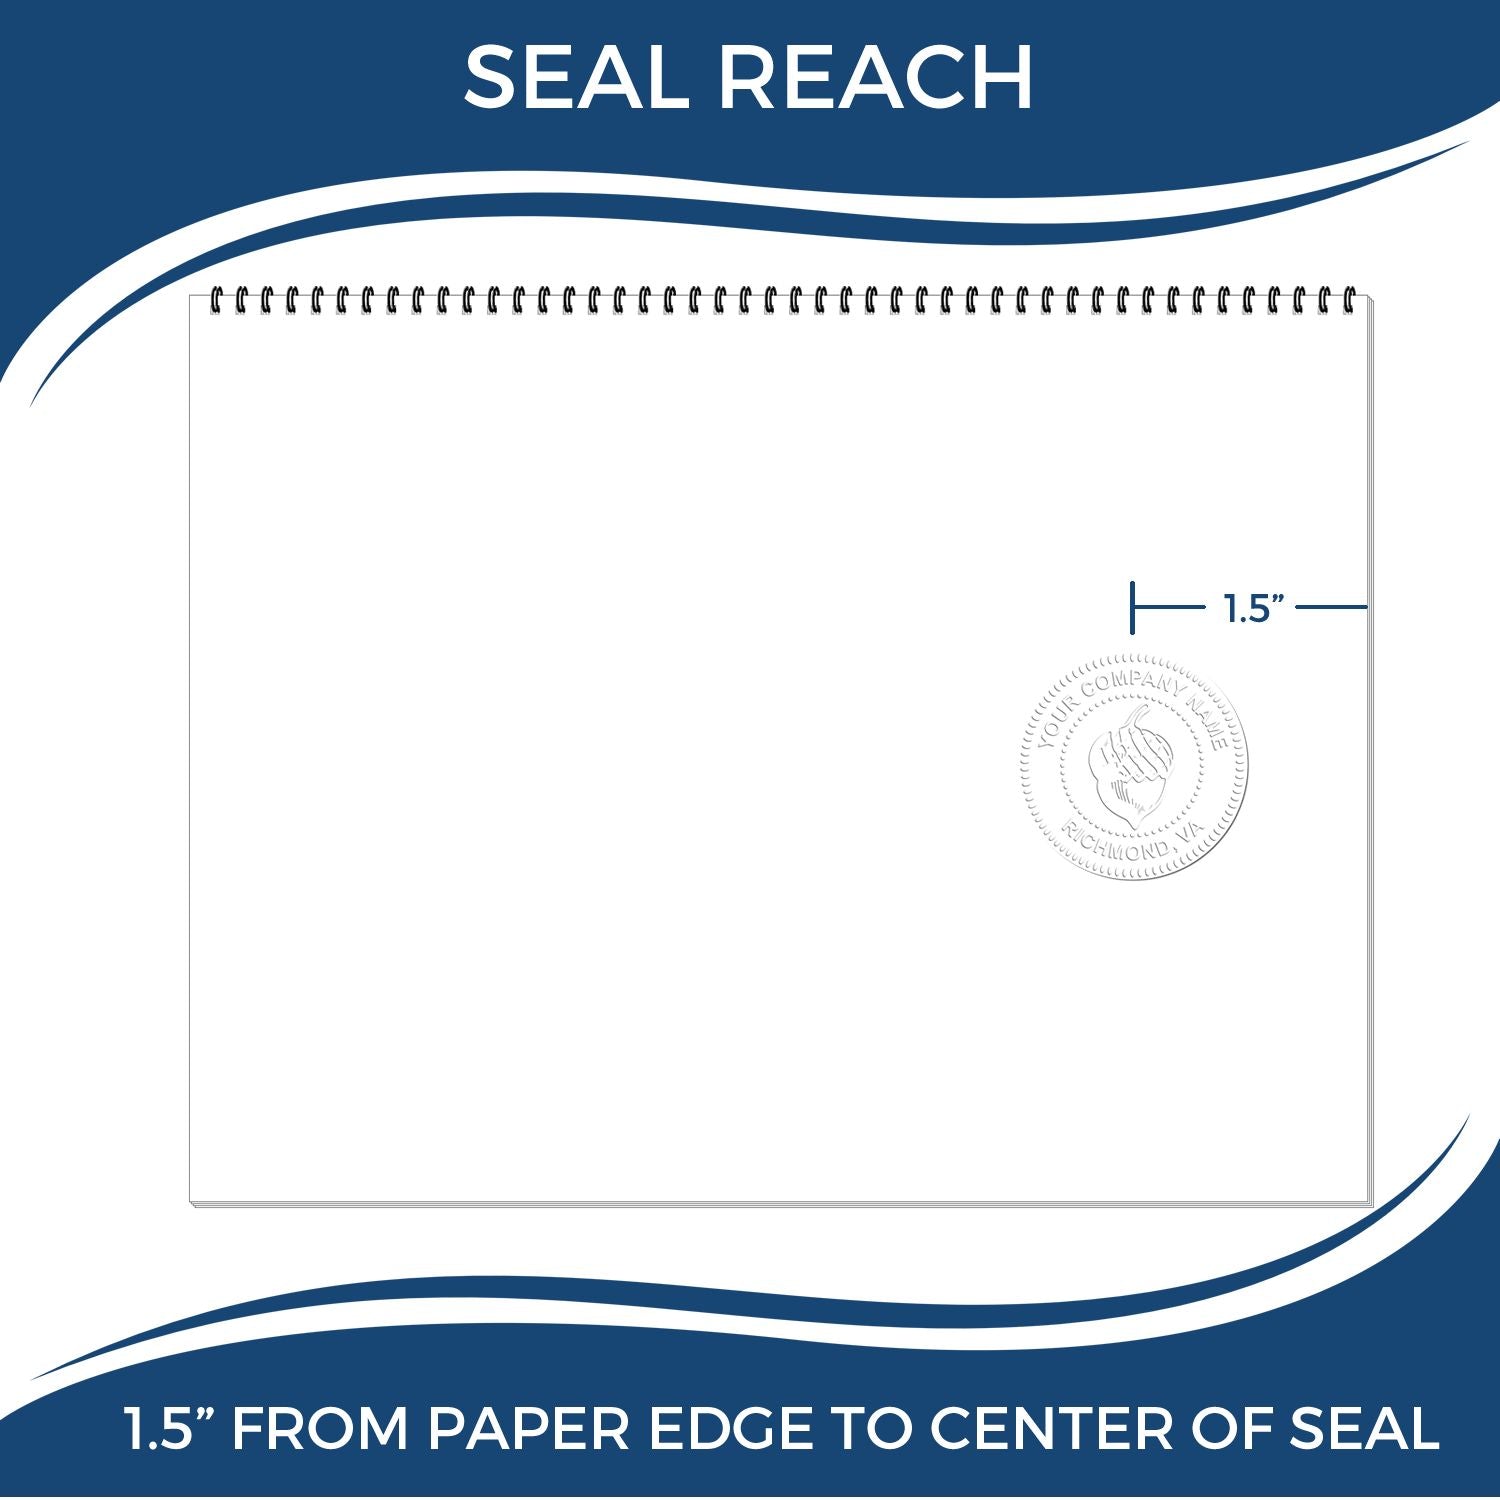 An infographic showing the seal reach which is represented by a ruler and a miniature seal image of the State of Kentucky Handheld Landscape Architect Seal